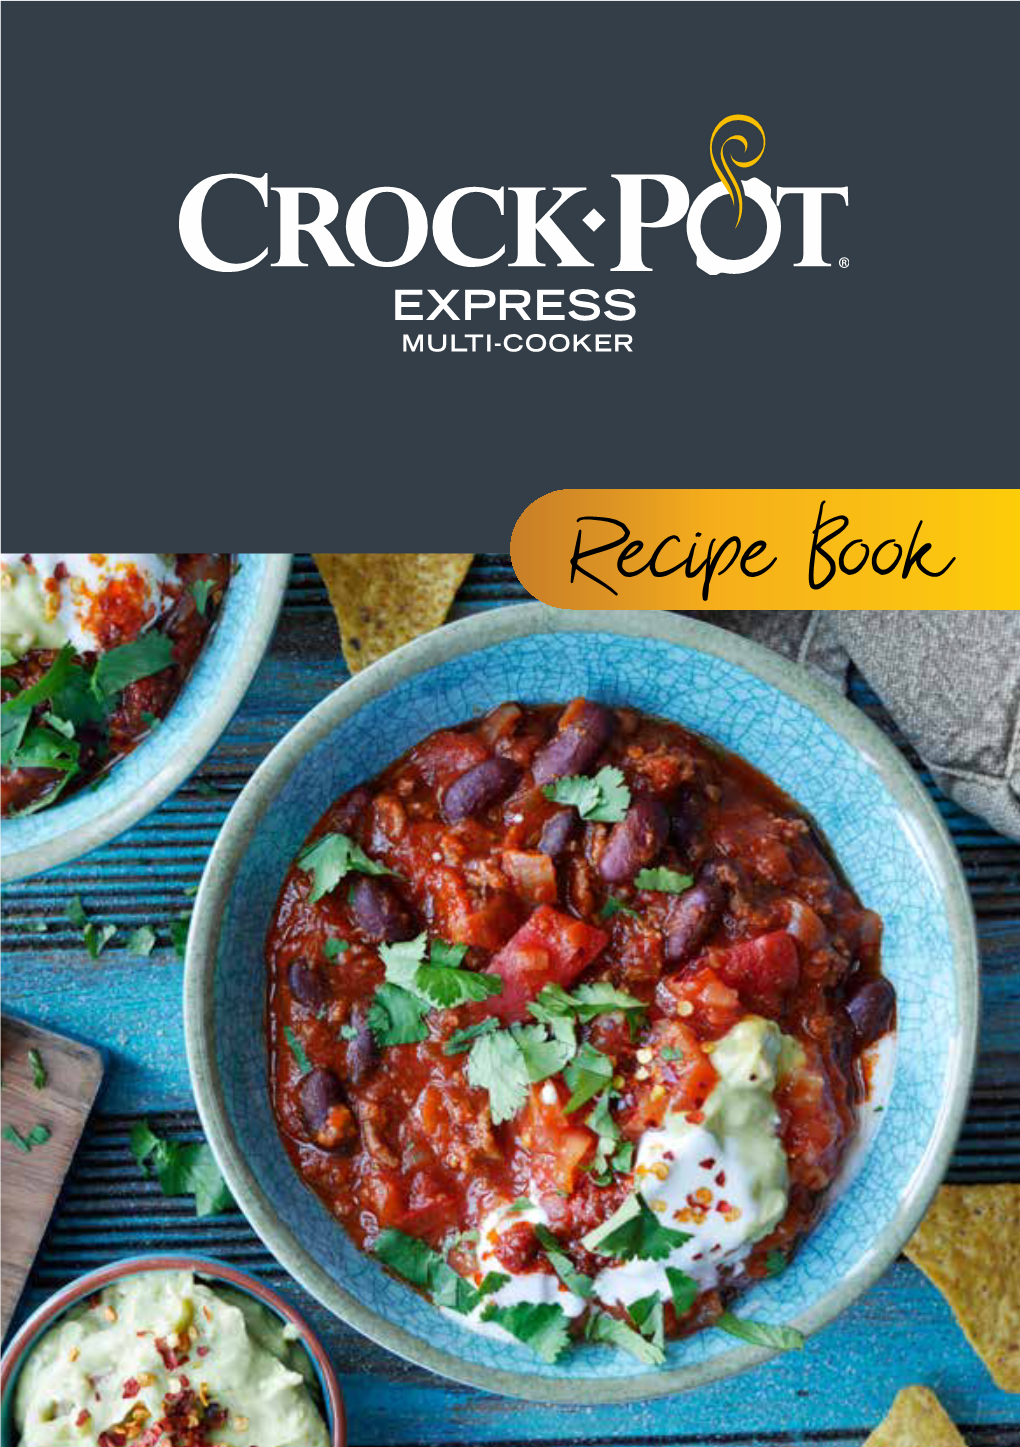 Recipe Book, We for Over 35 Years, the Crock- Walk Pot® Brand Has Been Your Trusted You Through Some of the Many Flavor- Brand for Cooking Convenience